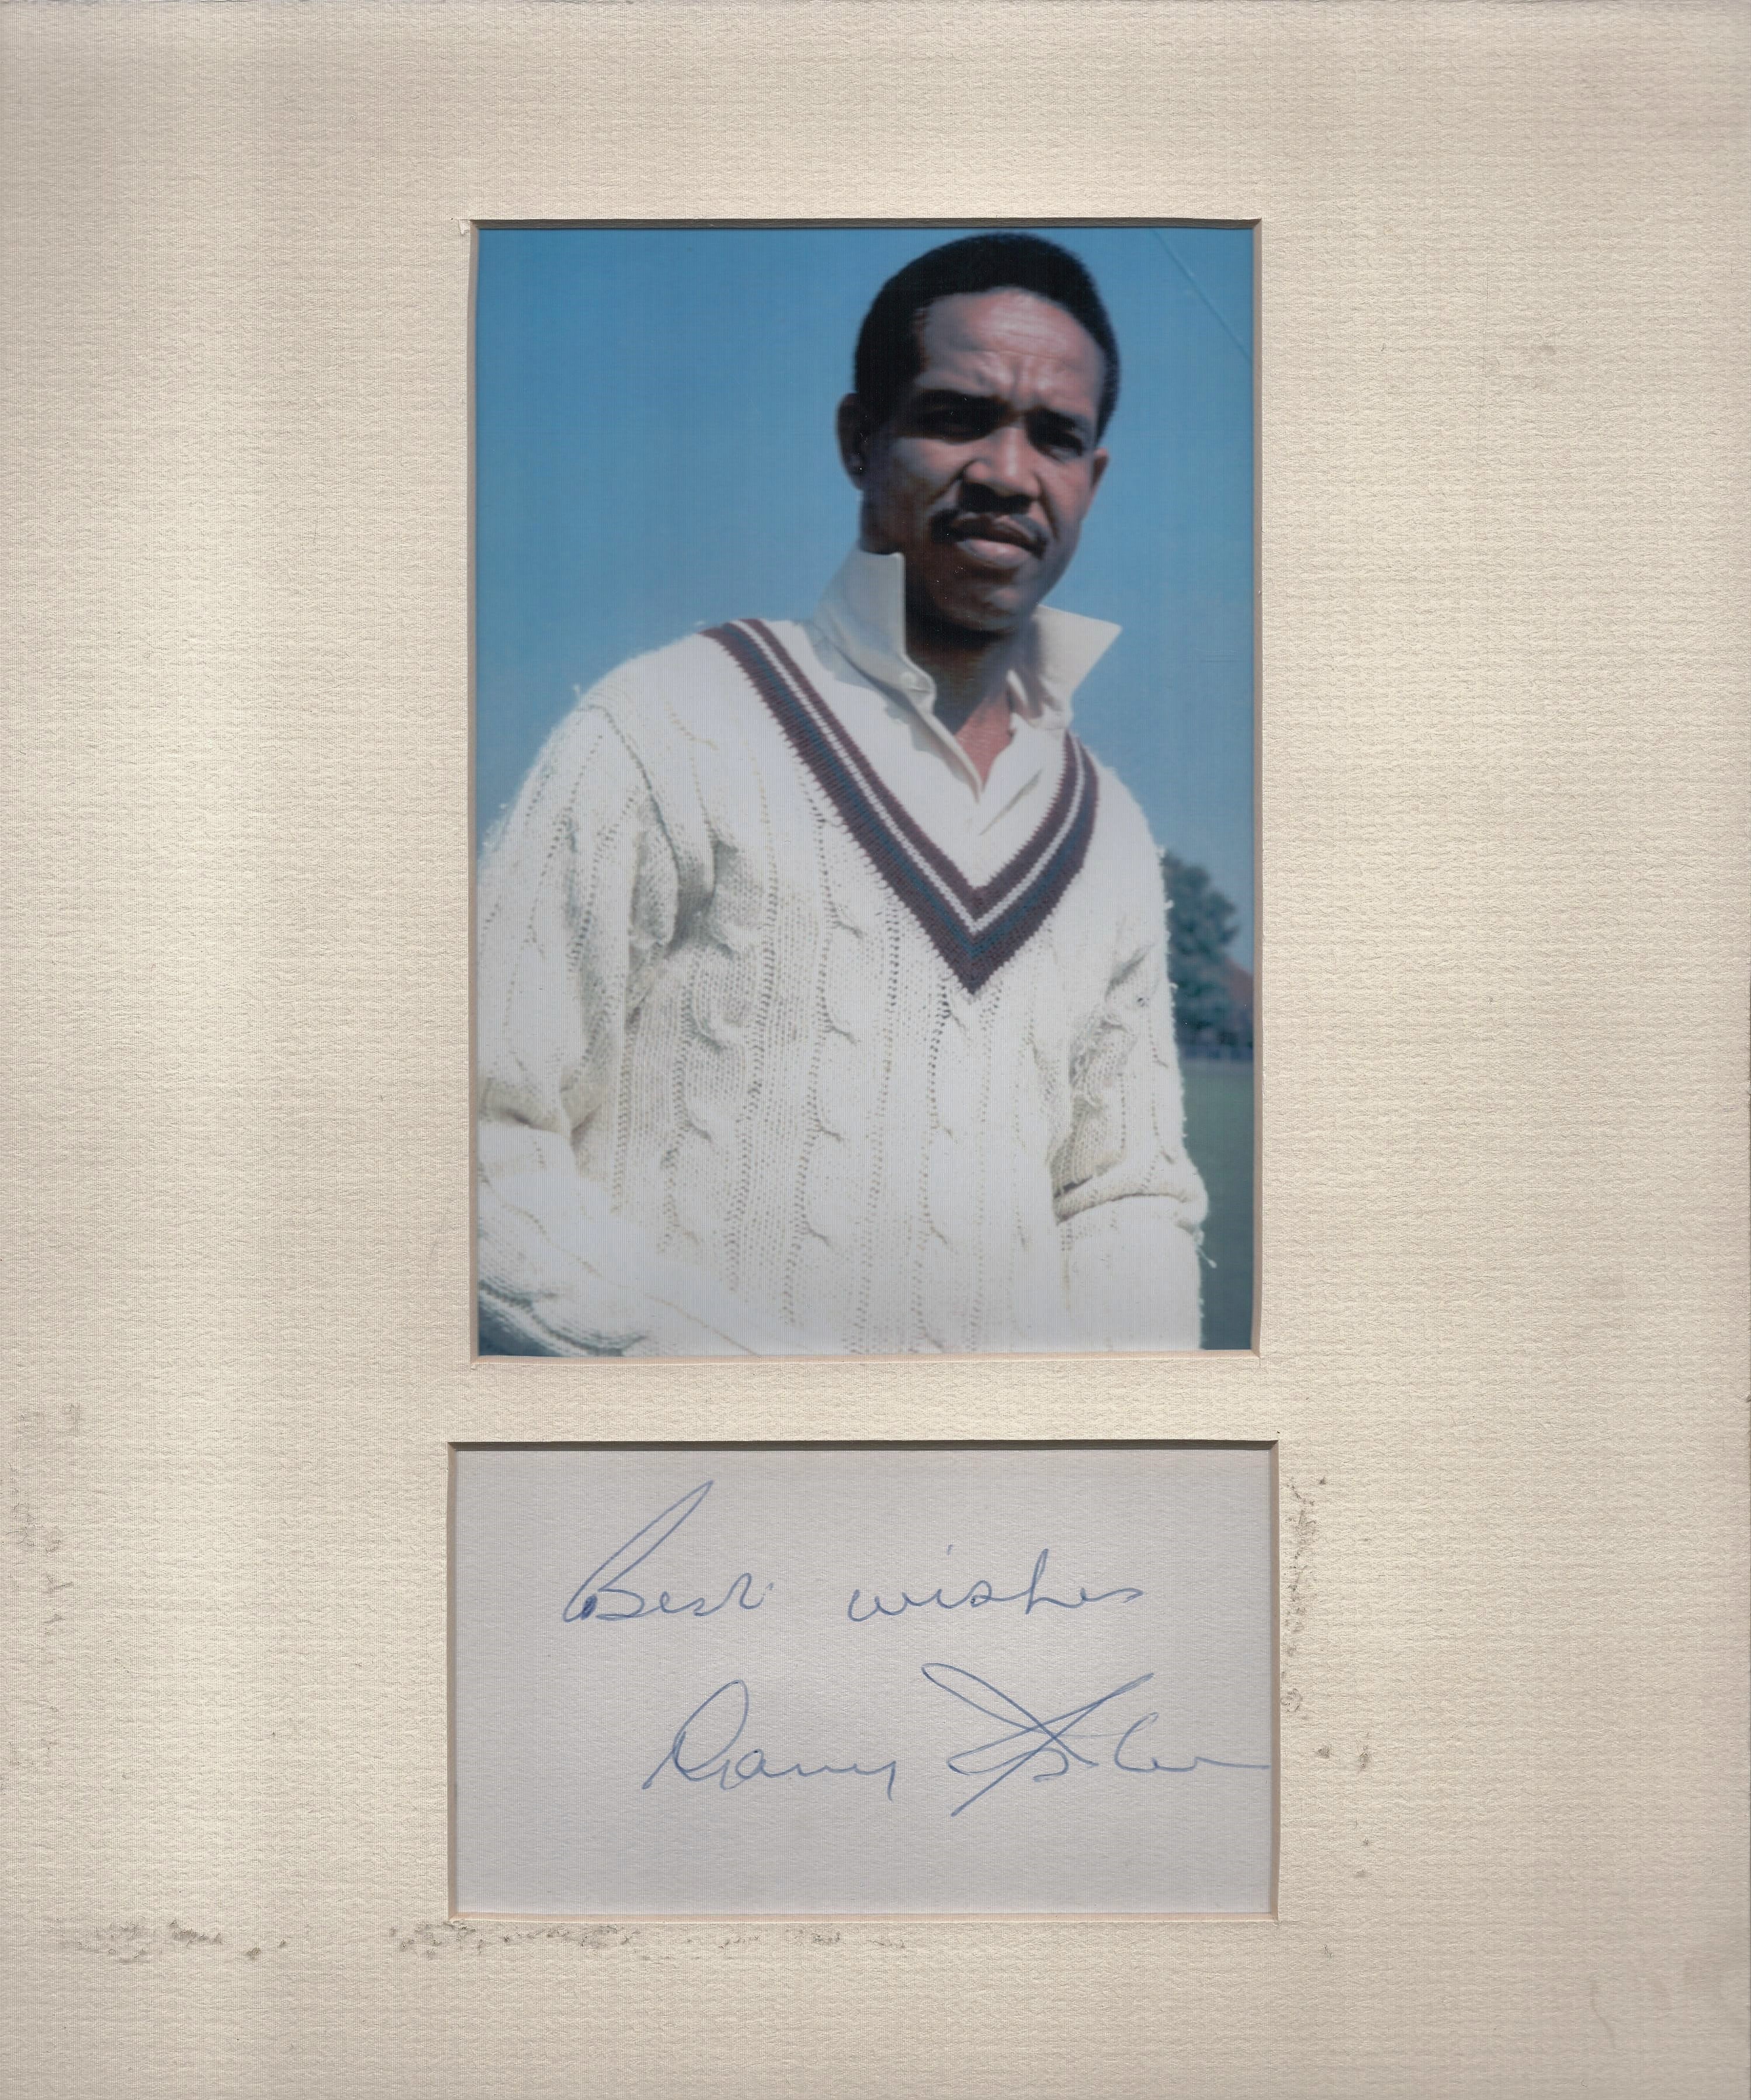 Gary Sobers 10x12 overall size mounted signature piece. Good condition. All autographs come with a